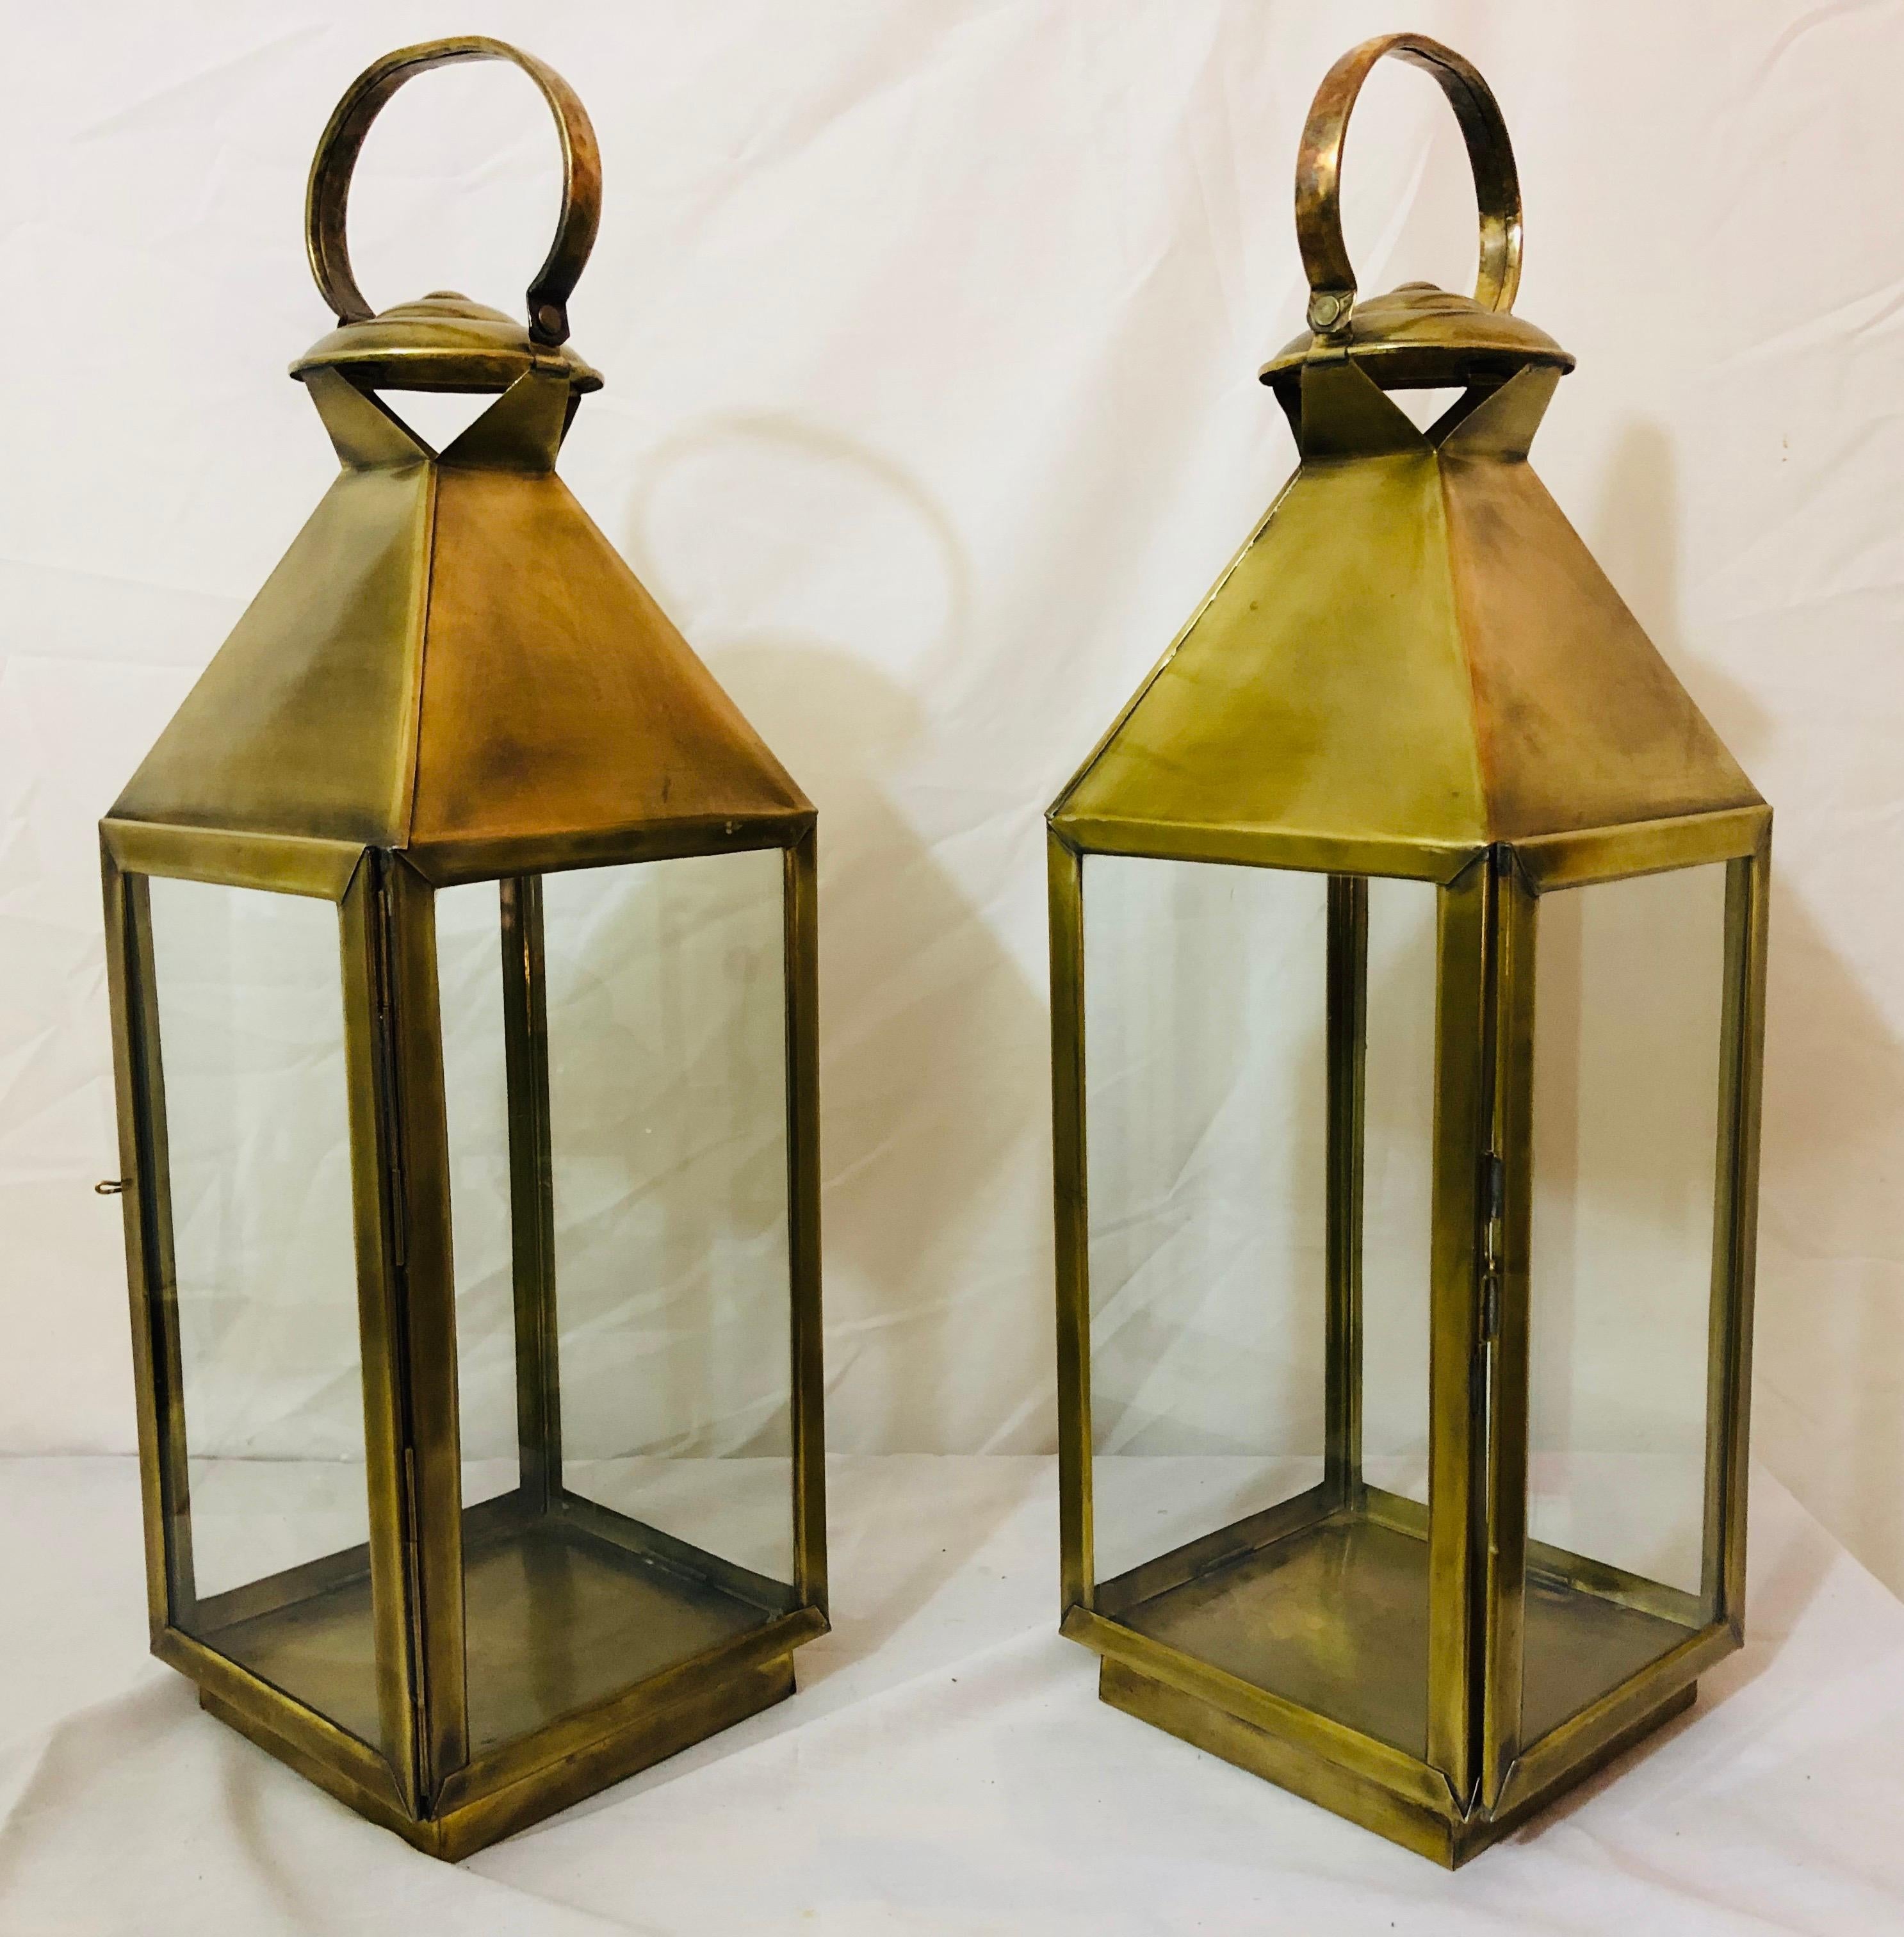 Brass lanterns or candleholder for indoor and outdoor, a pair

This classy pair of handmade lanterns or candleholder is made of Fine brass and will look beautiful indoor in your living room or bathroom to create a spa feel or outdoor in your